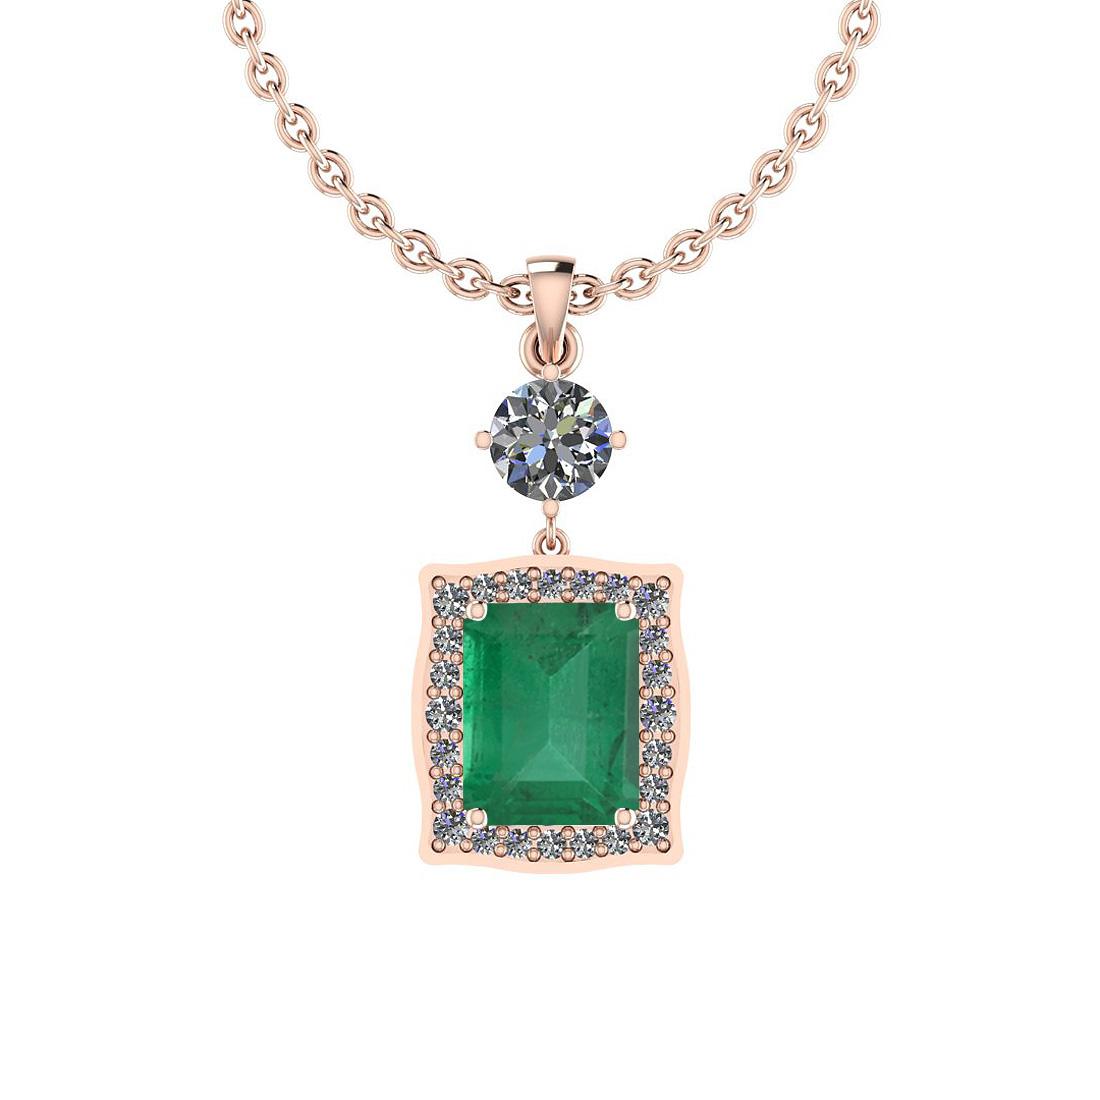 Certified 3.30 Ctw Emerald and Diamond I2/I3 14K Rose Gold Victorian Style Pendant Necklace